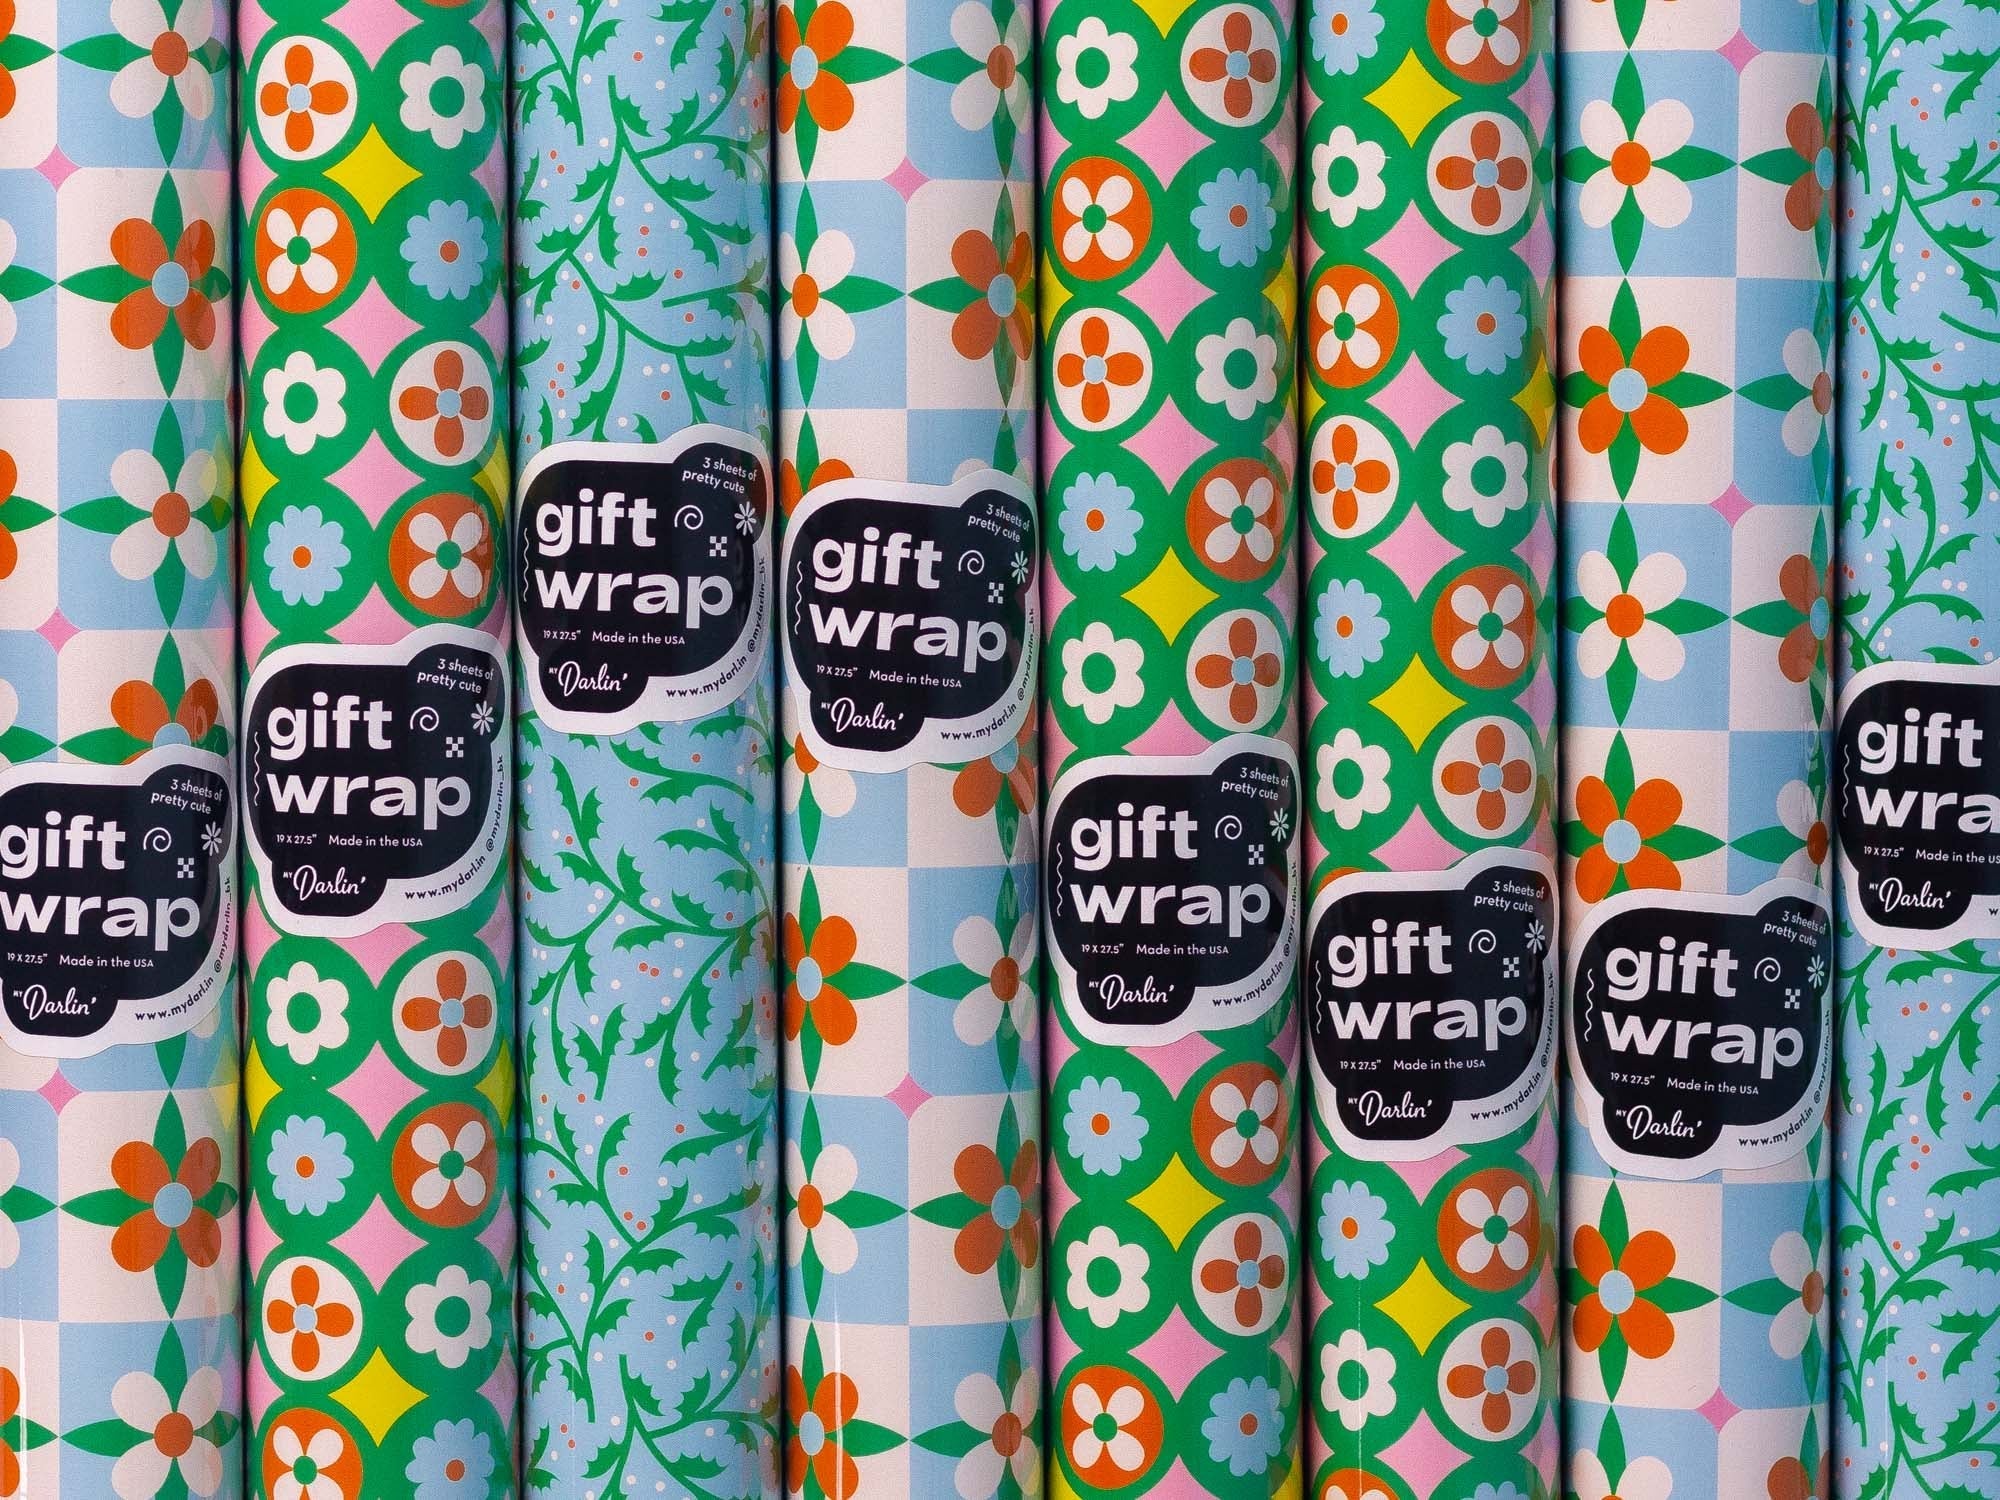 Rolls of retro floral holiday gift wrap by @mydarlin_bk Made in the USA